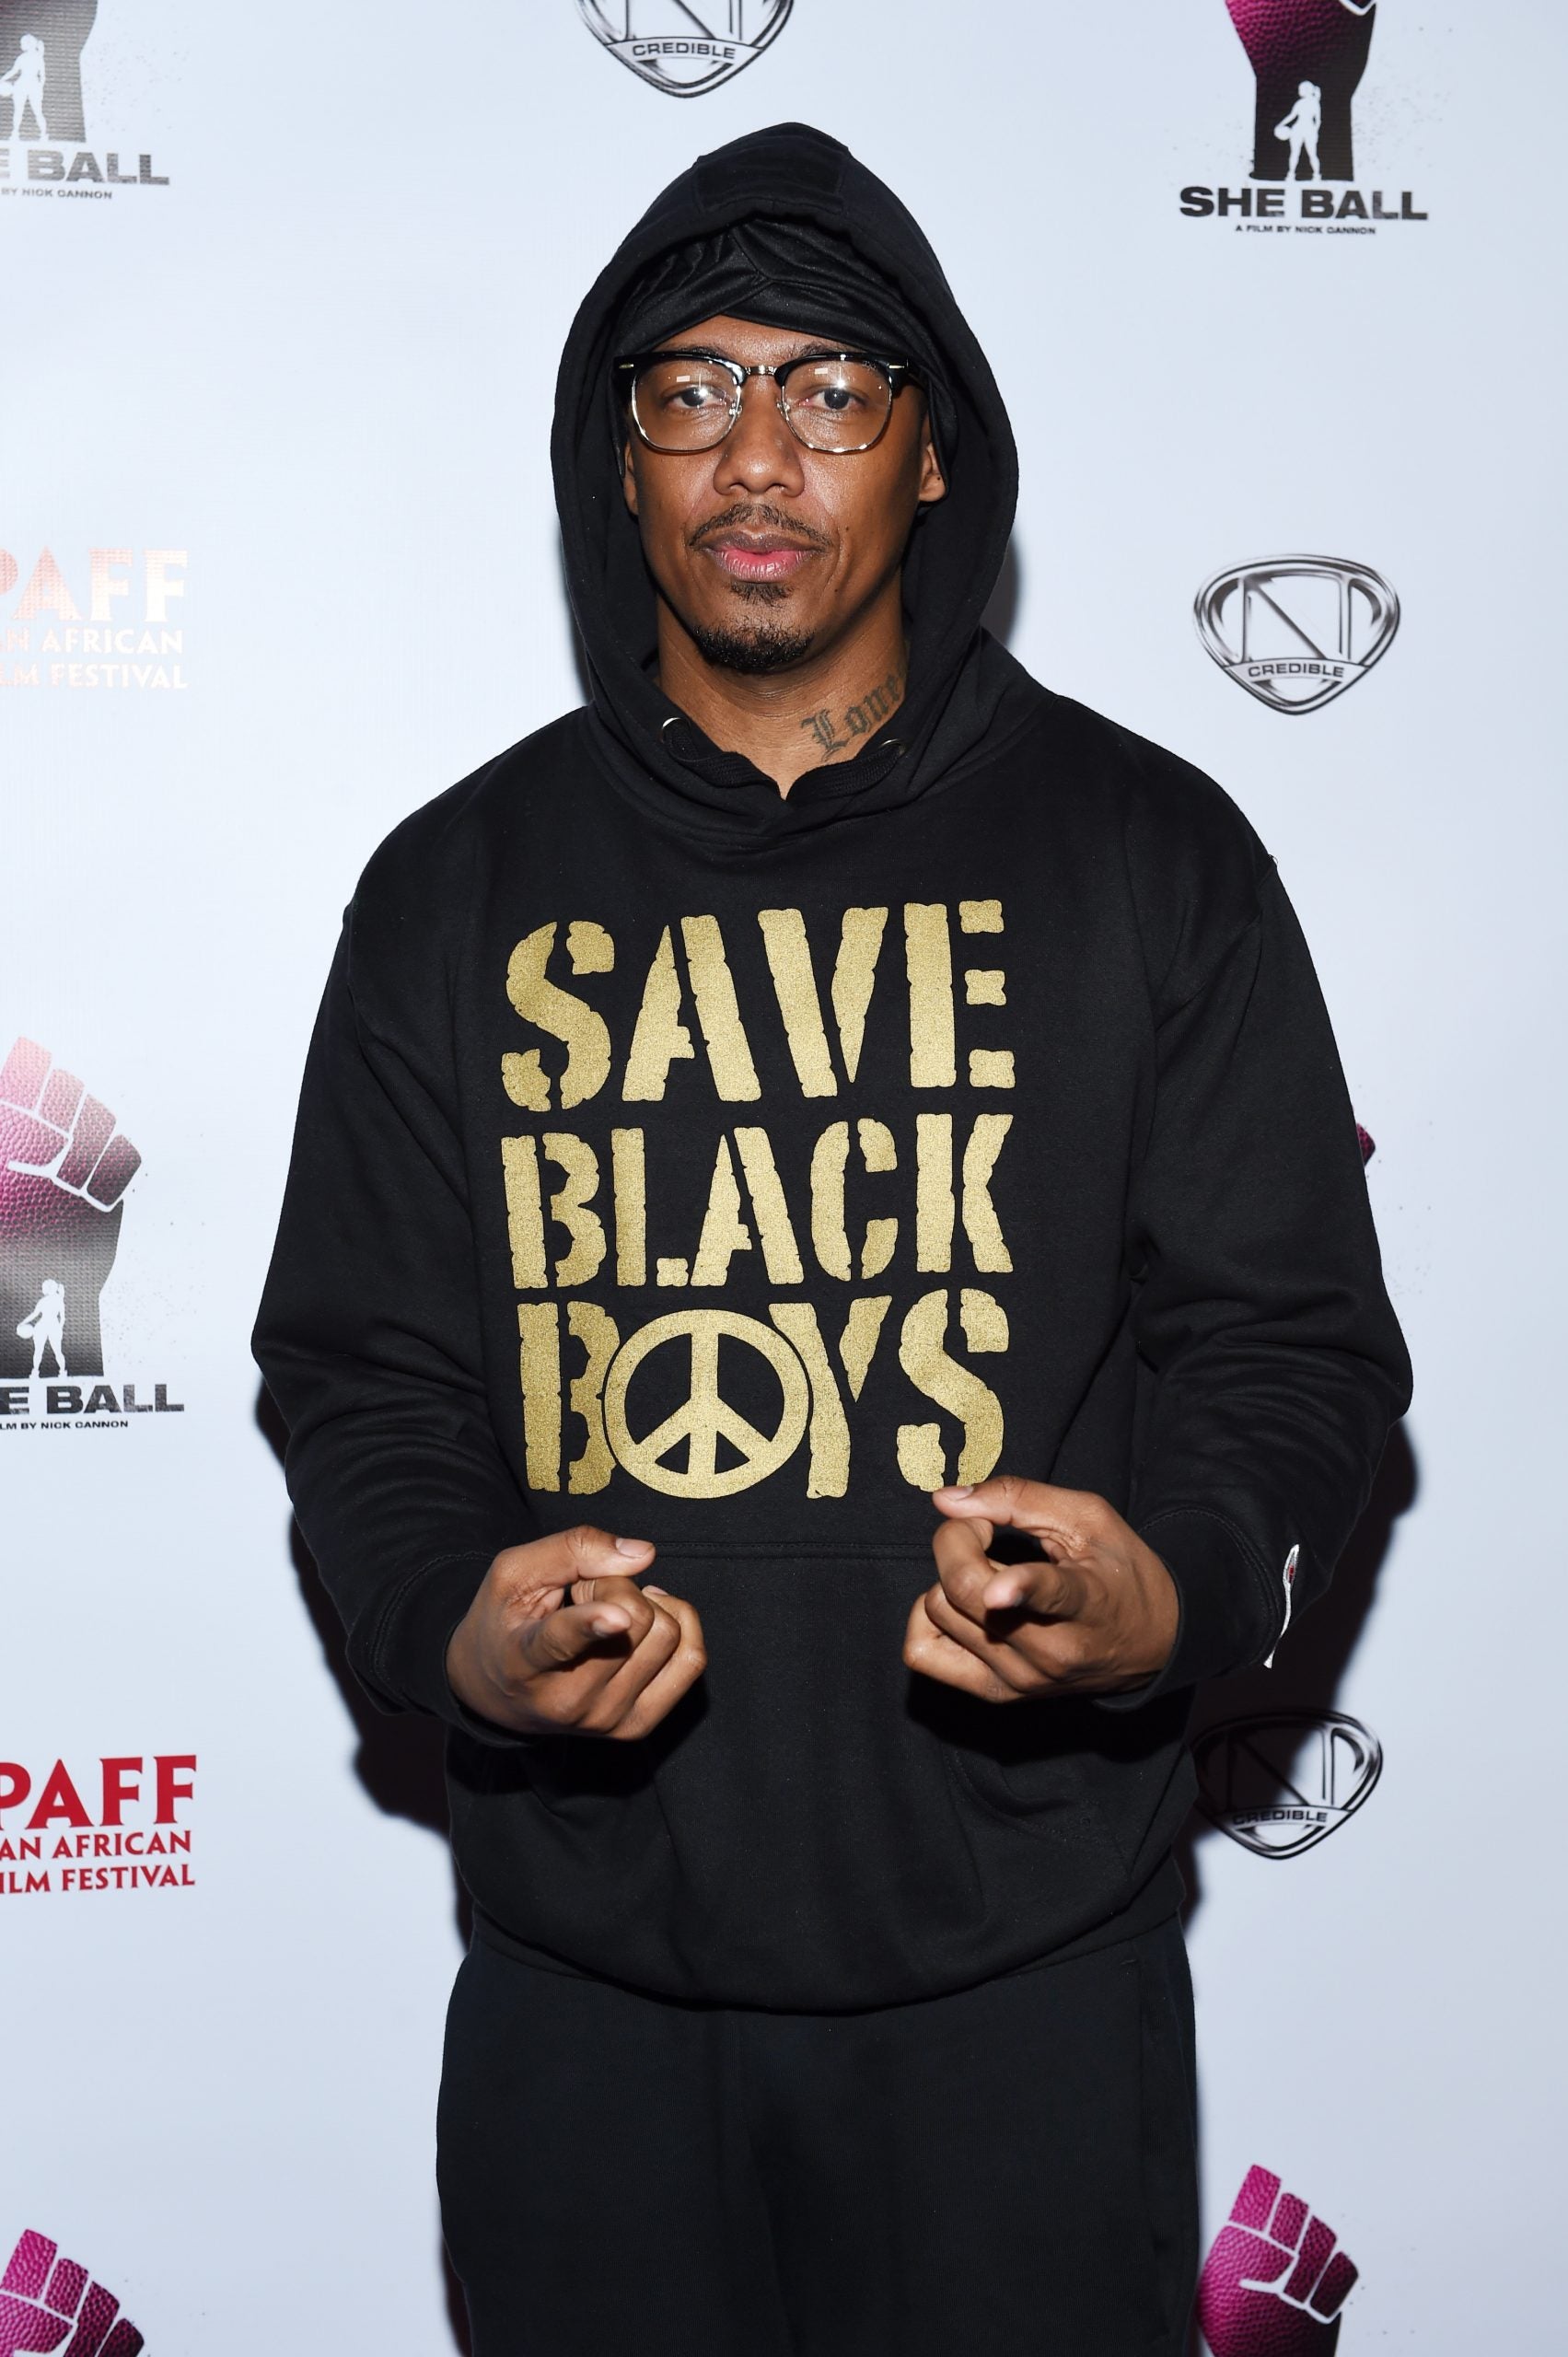 Nick Cannon Makes Good On Promise To Learn About The Jewish Community